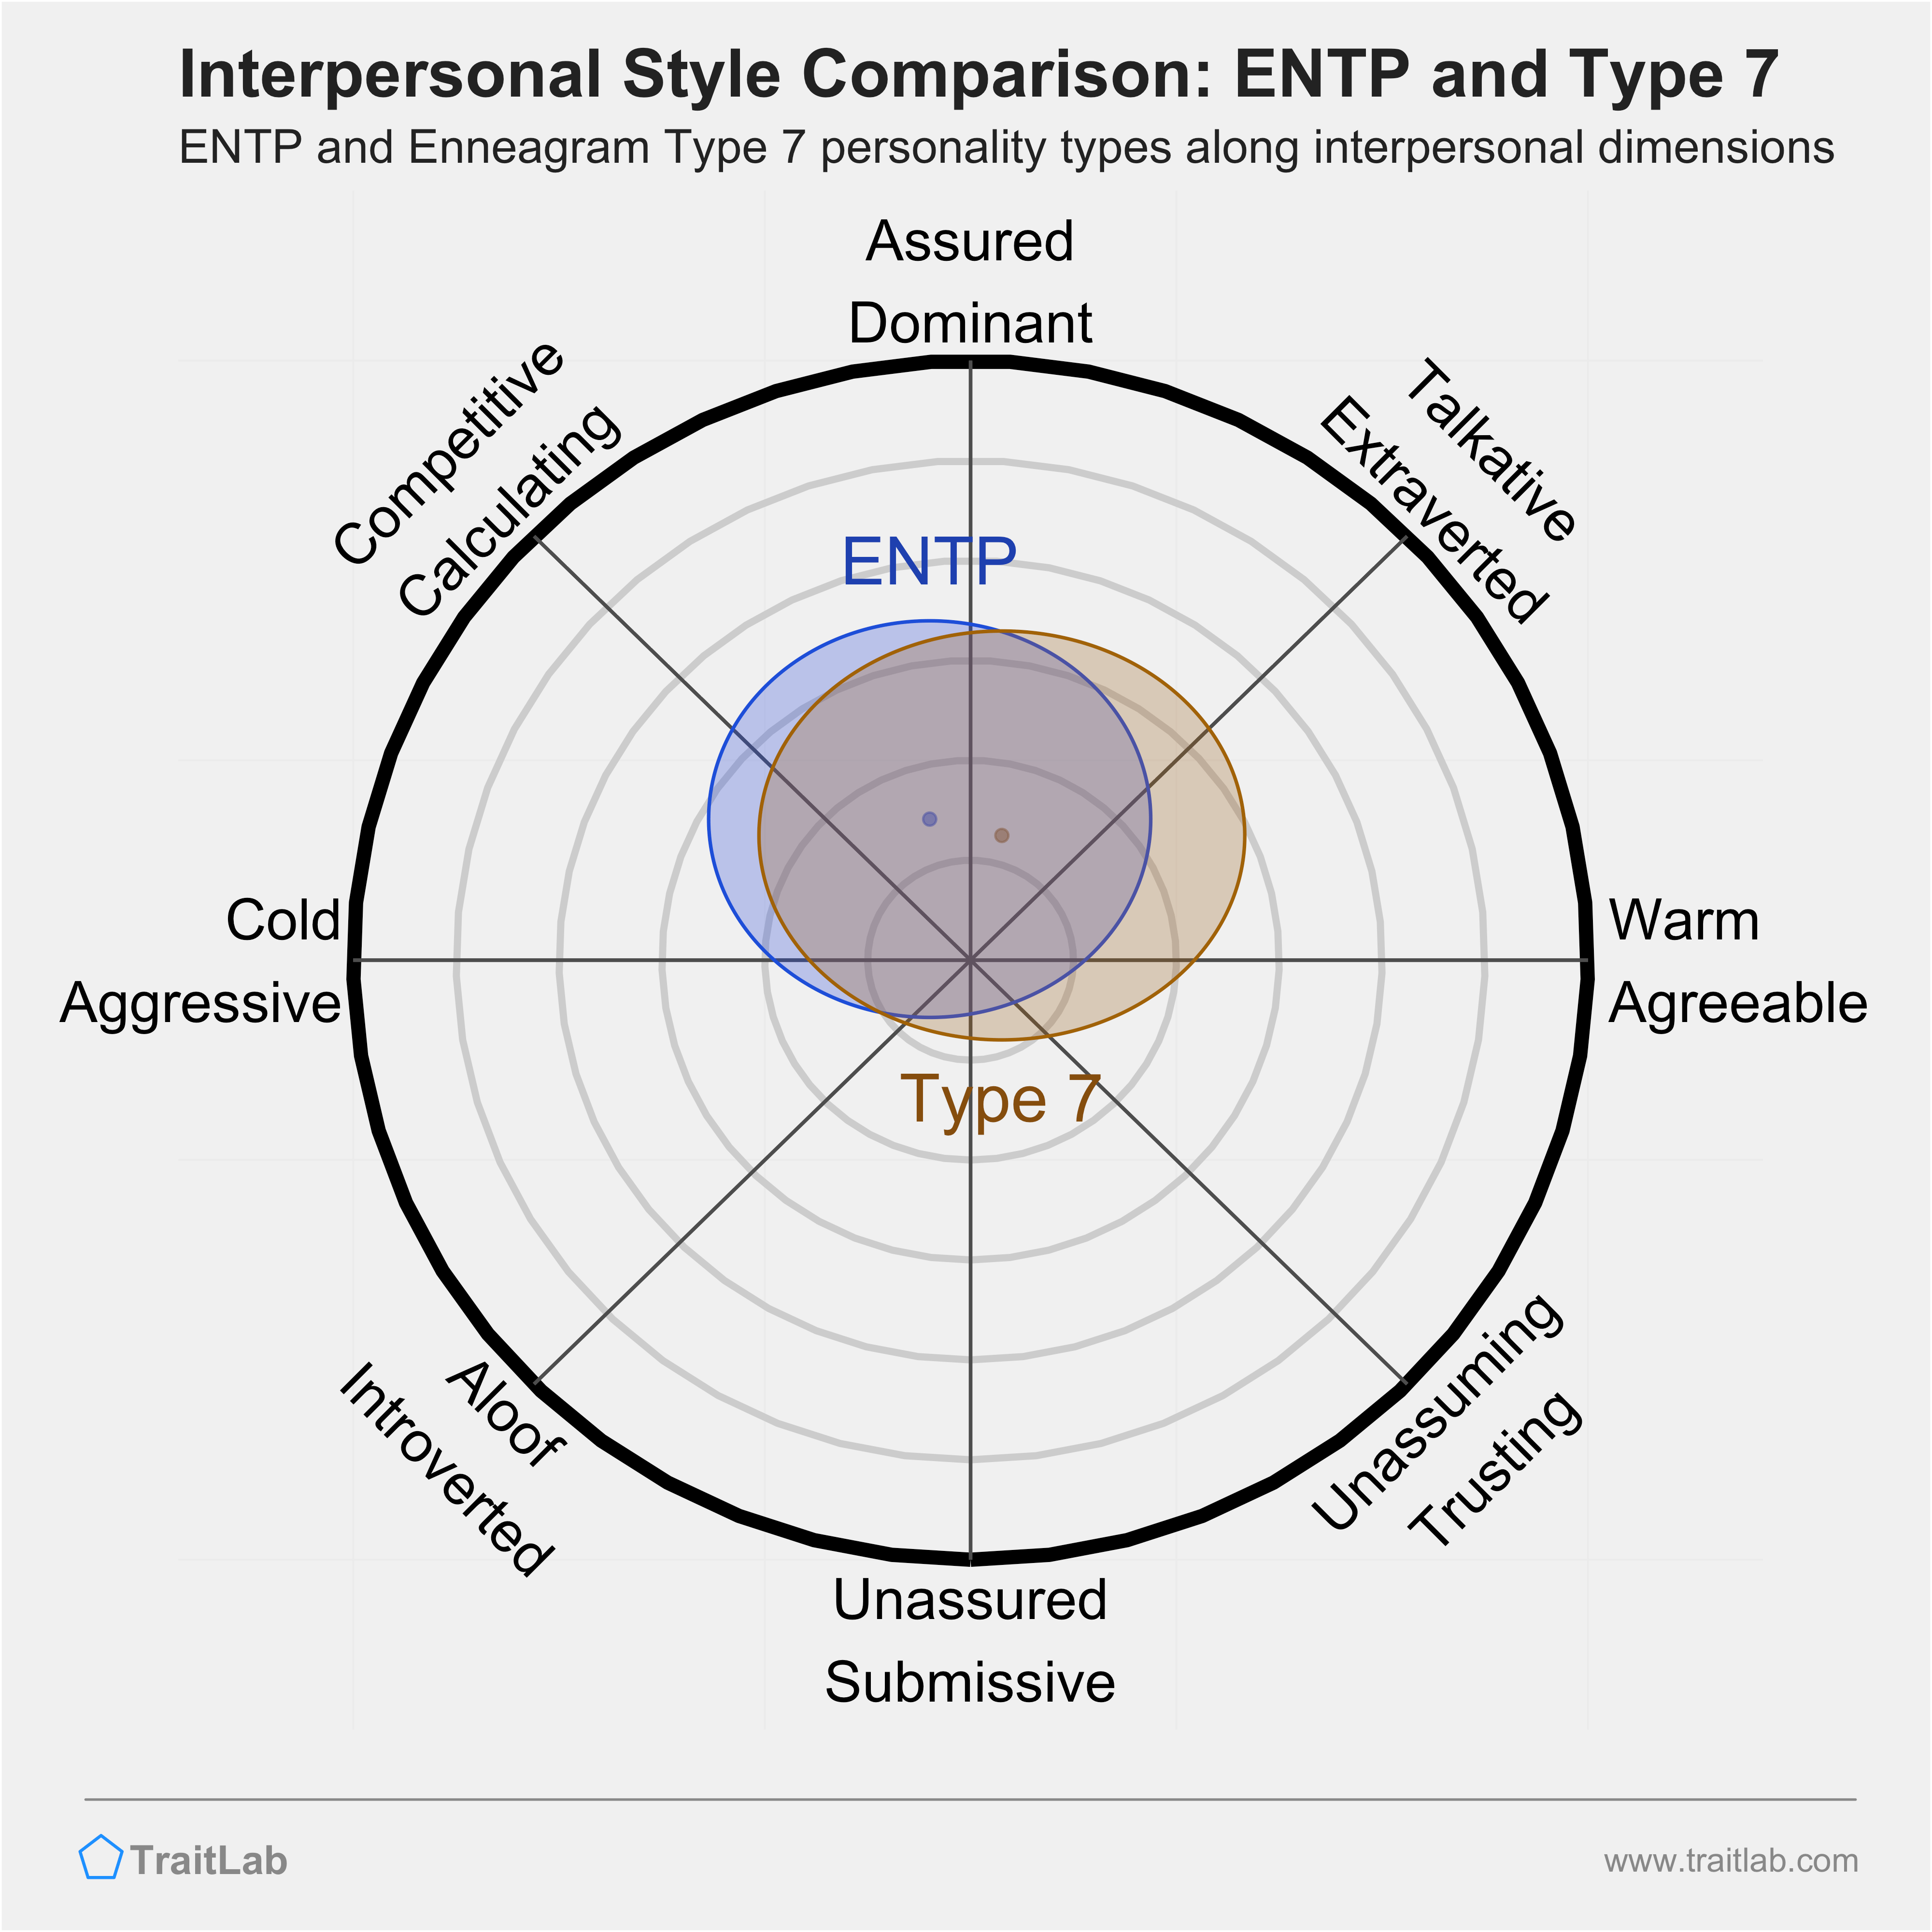 Enneagram ENTP and Type 7 comparison across interpersonal dimensions